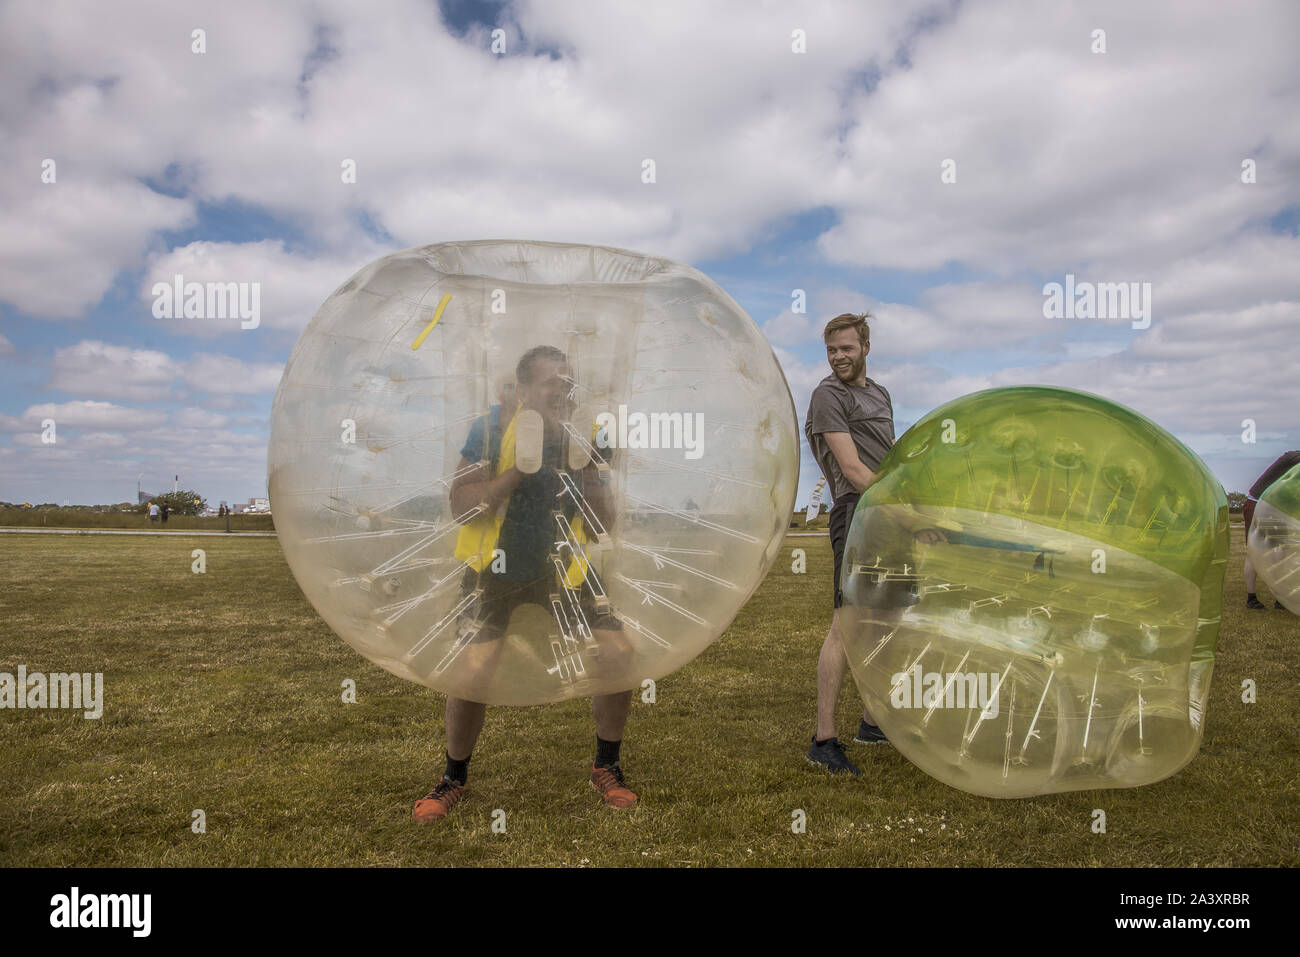 playing soccer in an inflatable bumper ball with a transparent plastic shell, Copenhagen, Denmark, May 25, 2019 Stock Photo